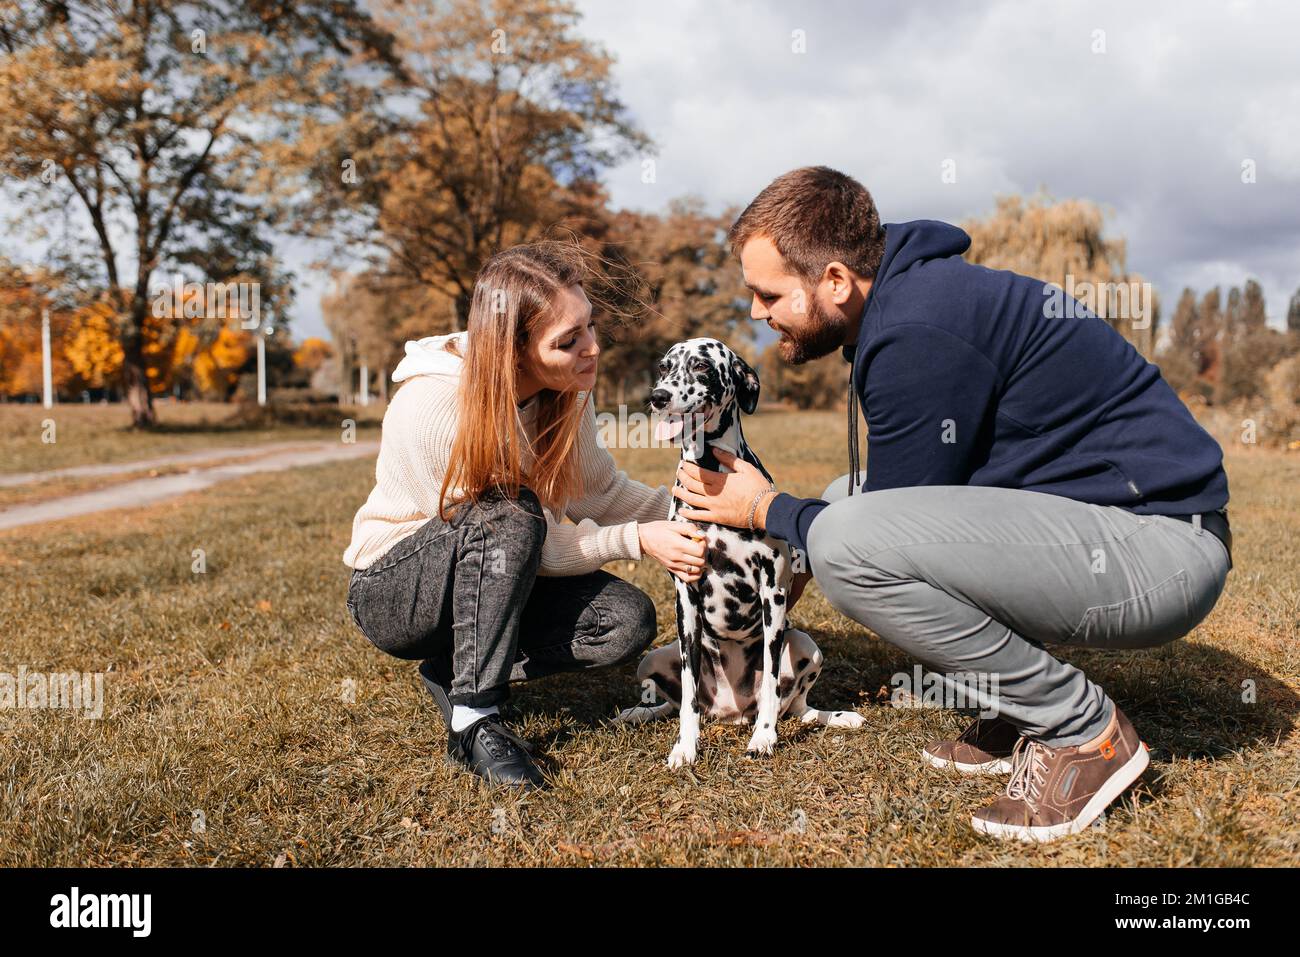 A young couple is having fun with a Dalmatian dog outdoors. Stock Photo